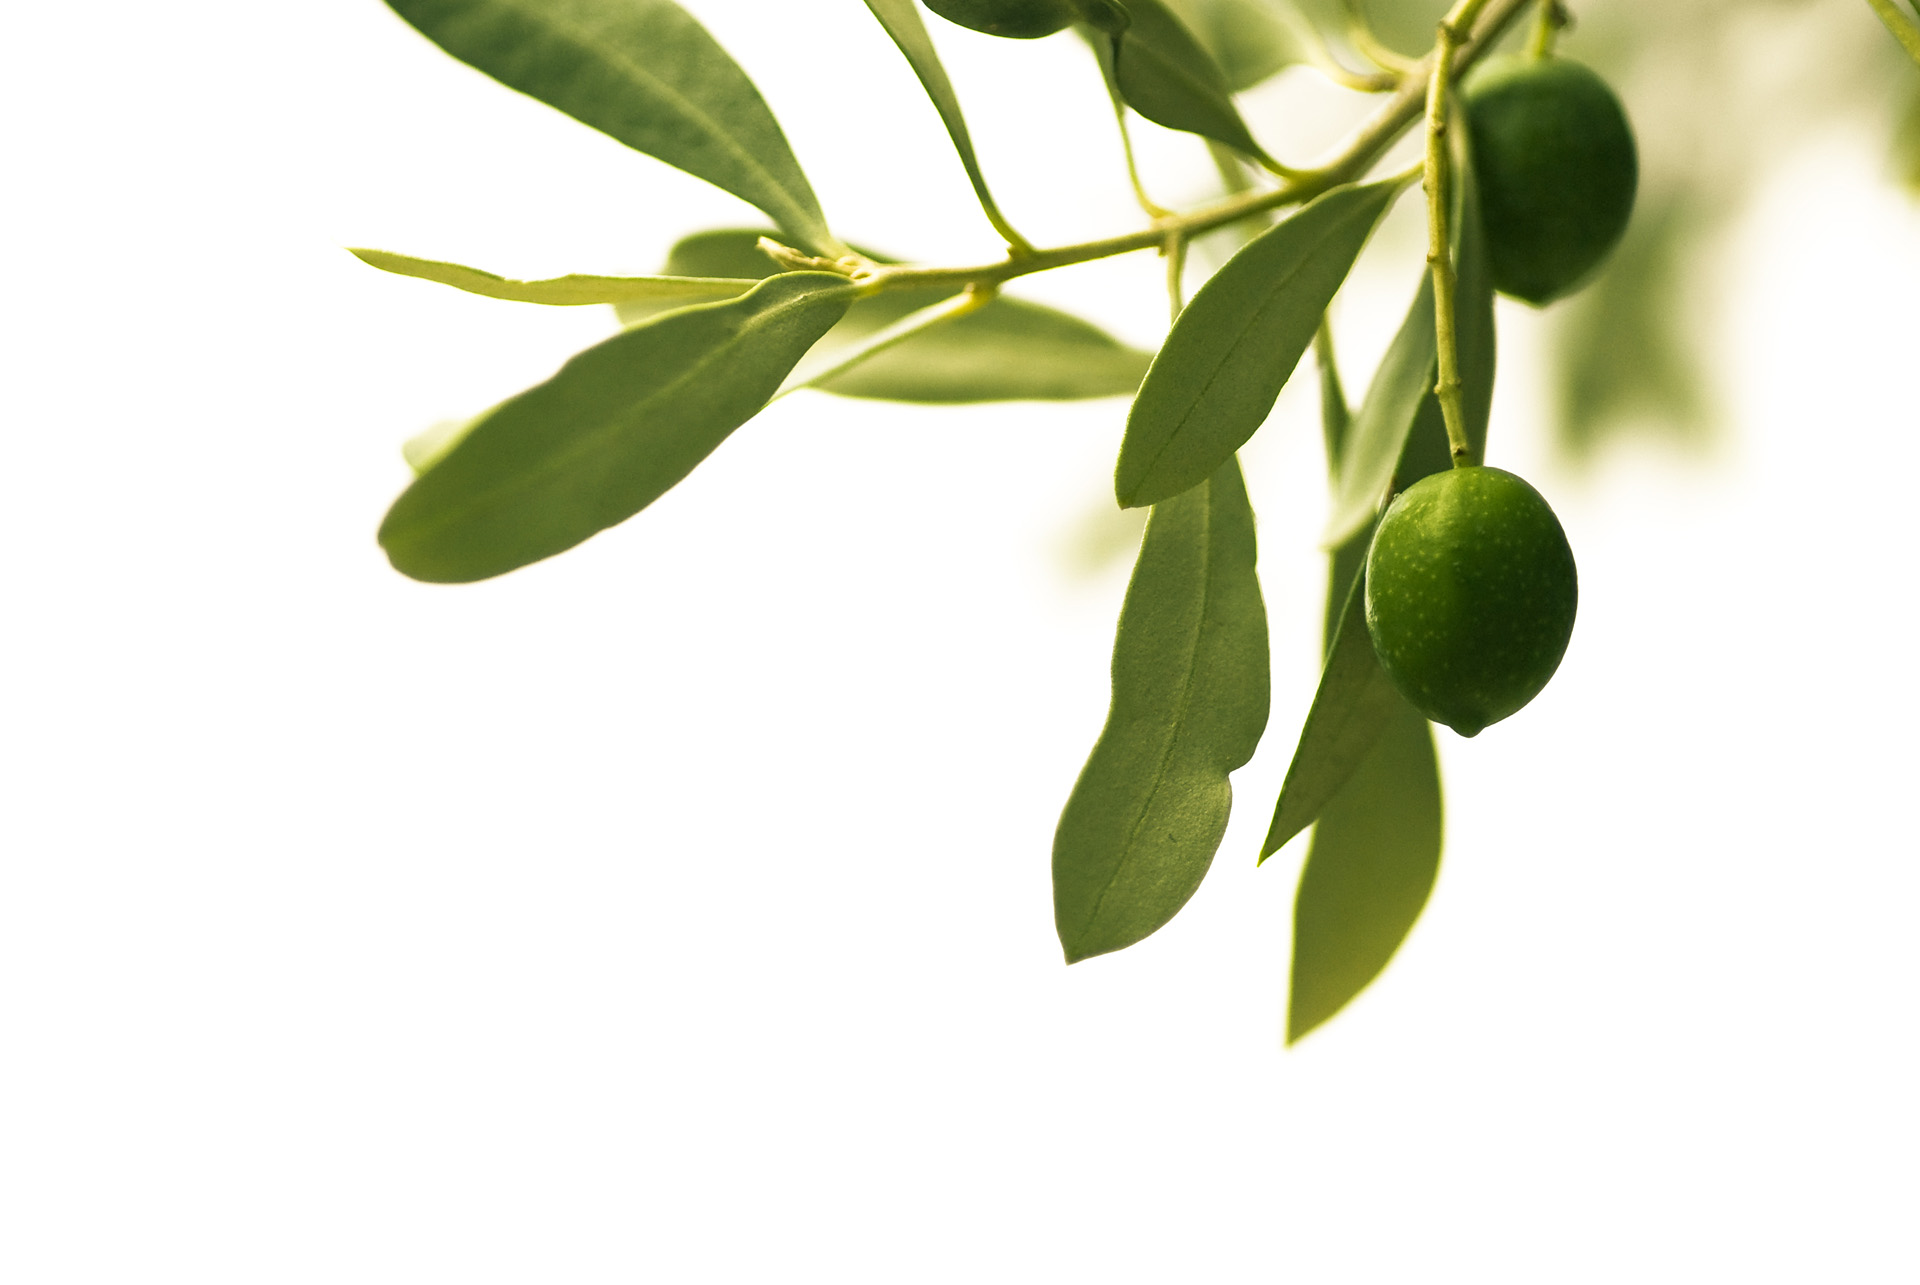 Green olive in the Laino products